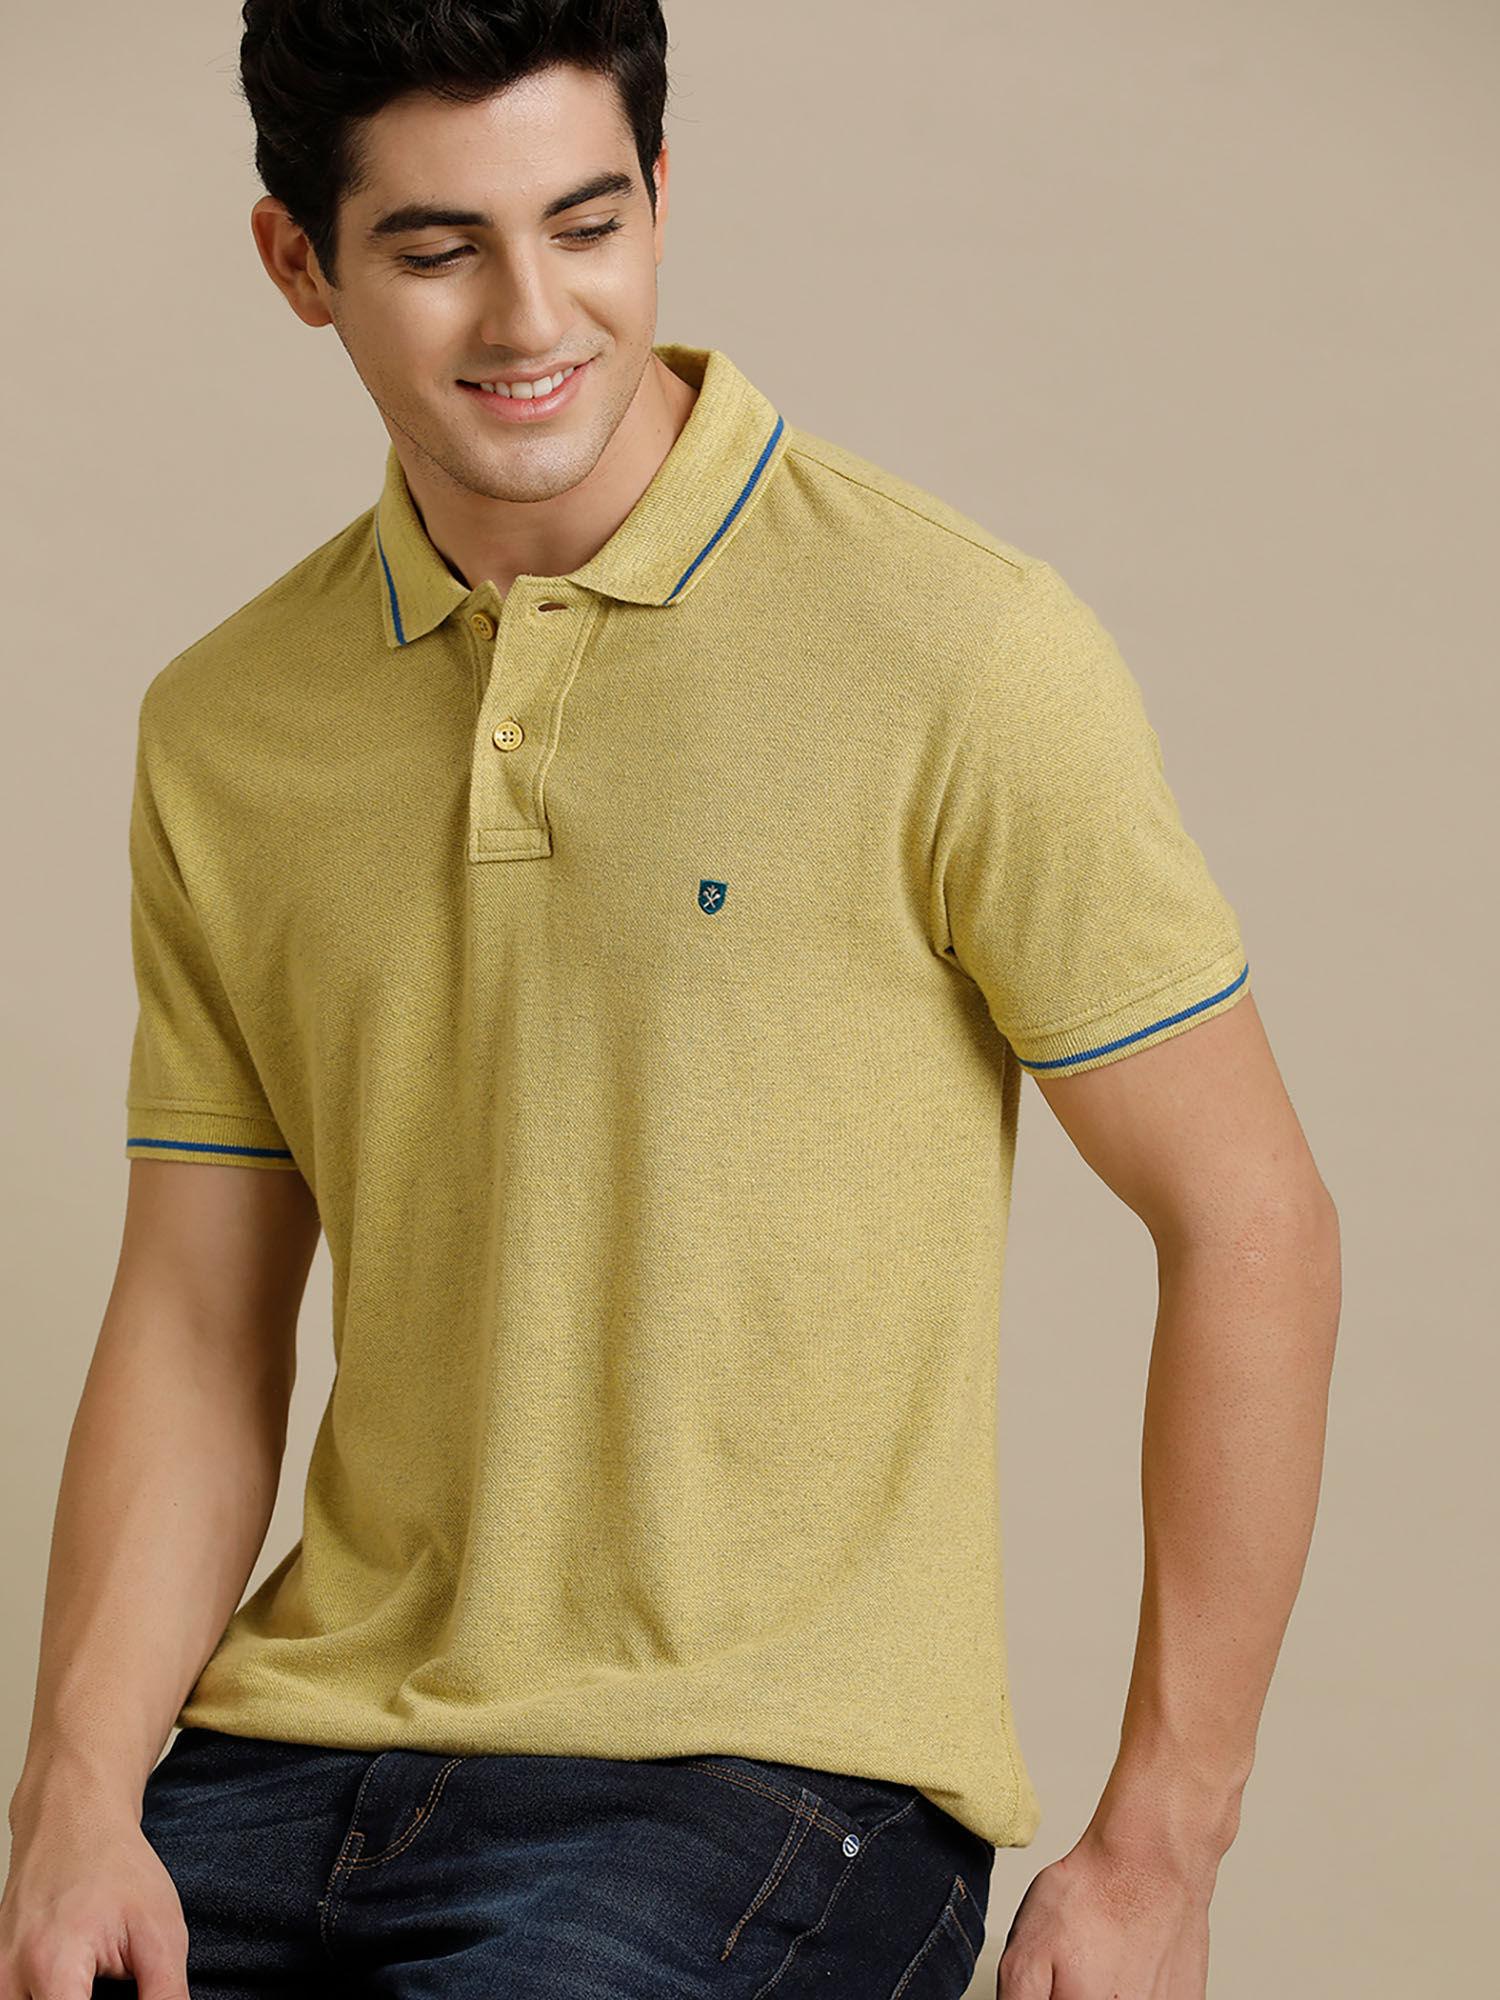 circular knit polo neck yellow solid half sleeve t-shirt for men